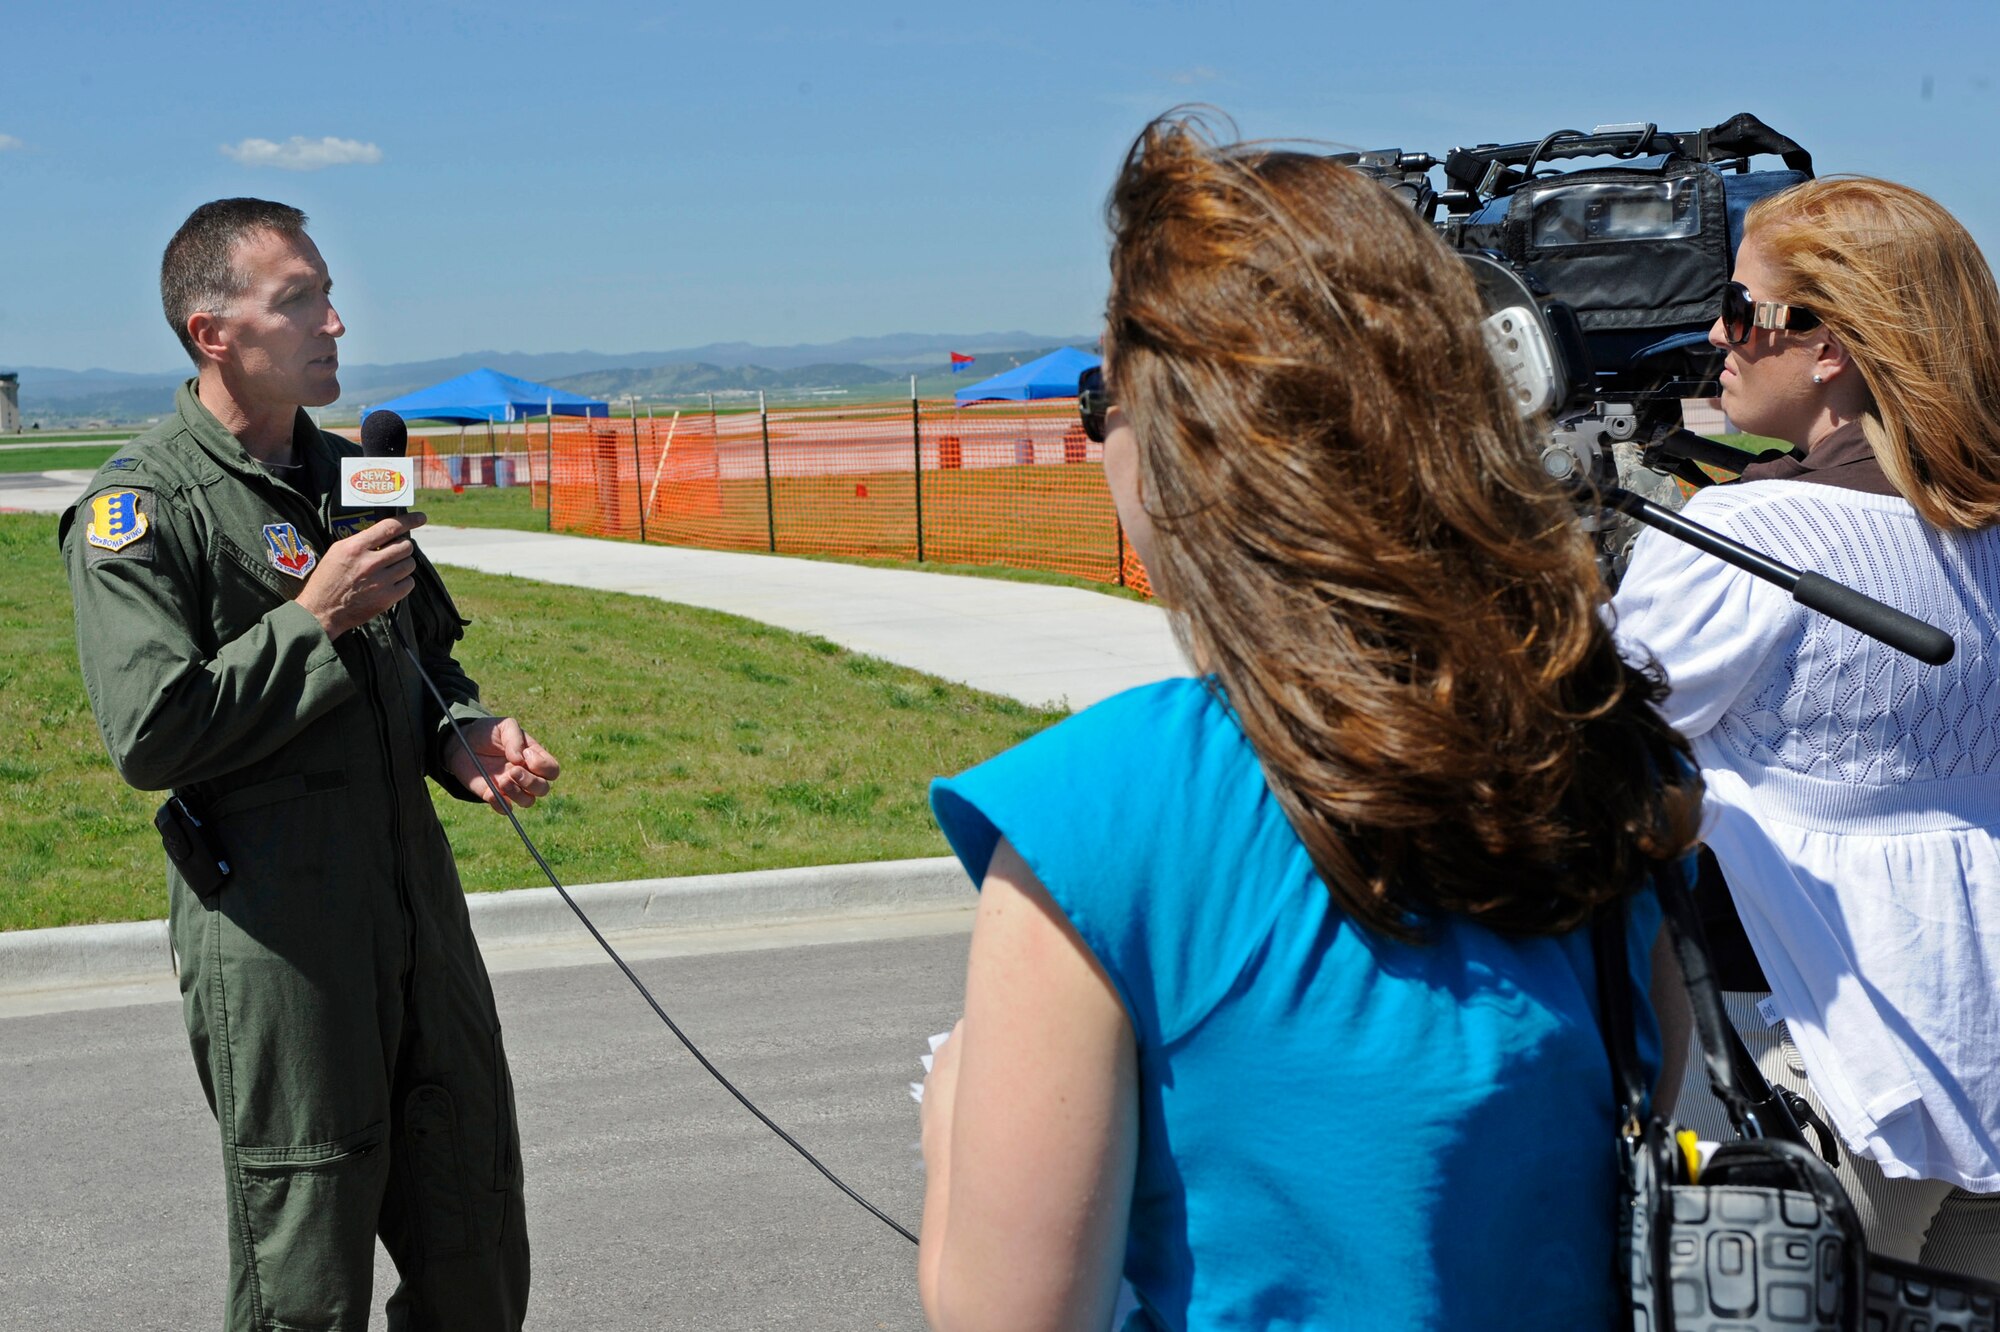 Col. Scott Vander Hamm, 28th Bomb Wing commander, conducts an interview with local media outlets here, May 29.  The local media outlets visited Ellsworth as part of media day for the Dakota Thunder 2009 open house and air show. (U.S. Air Force photo/Airman 1st Class Matthew Flynn)